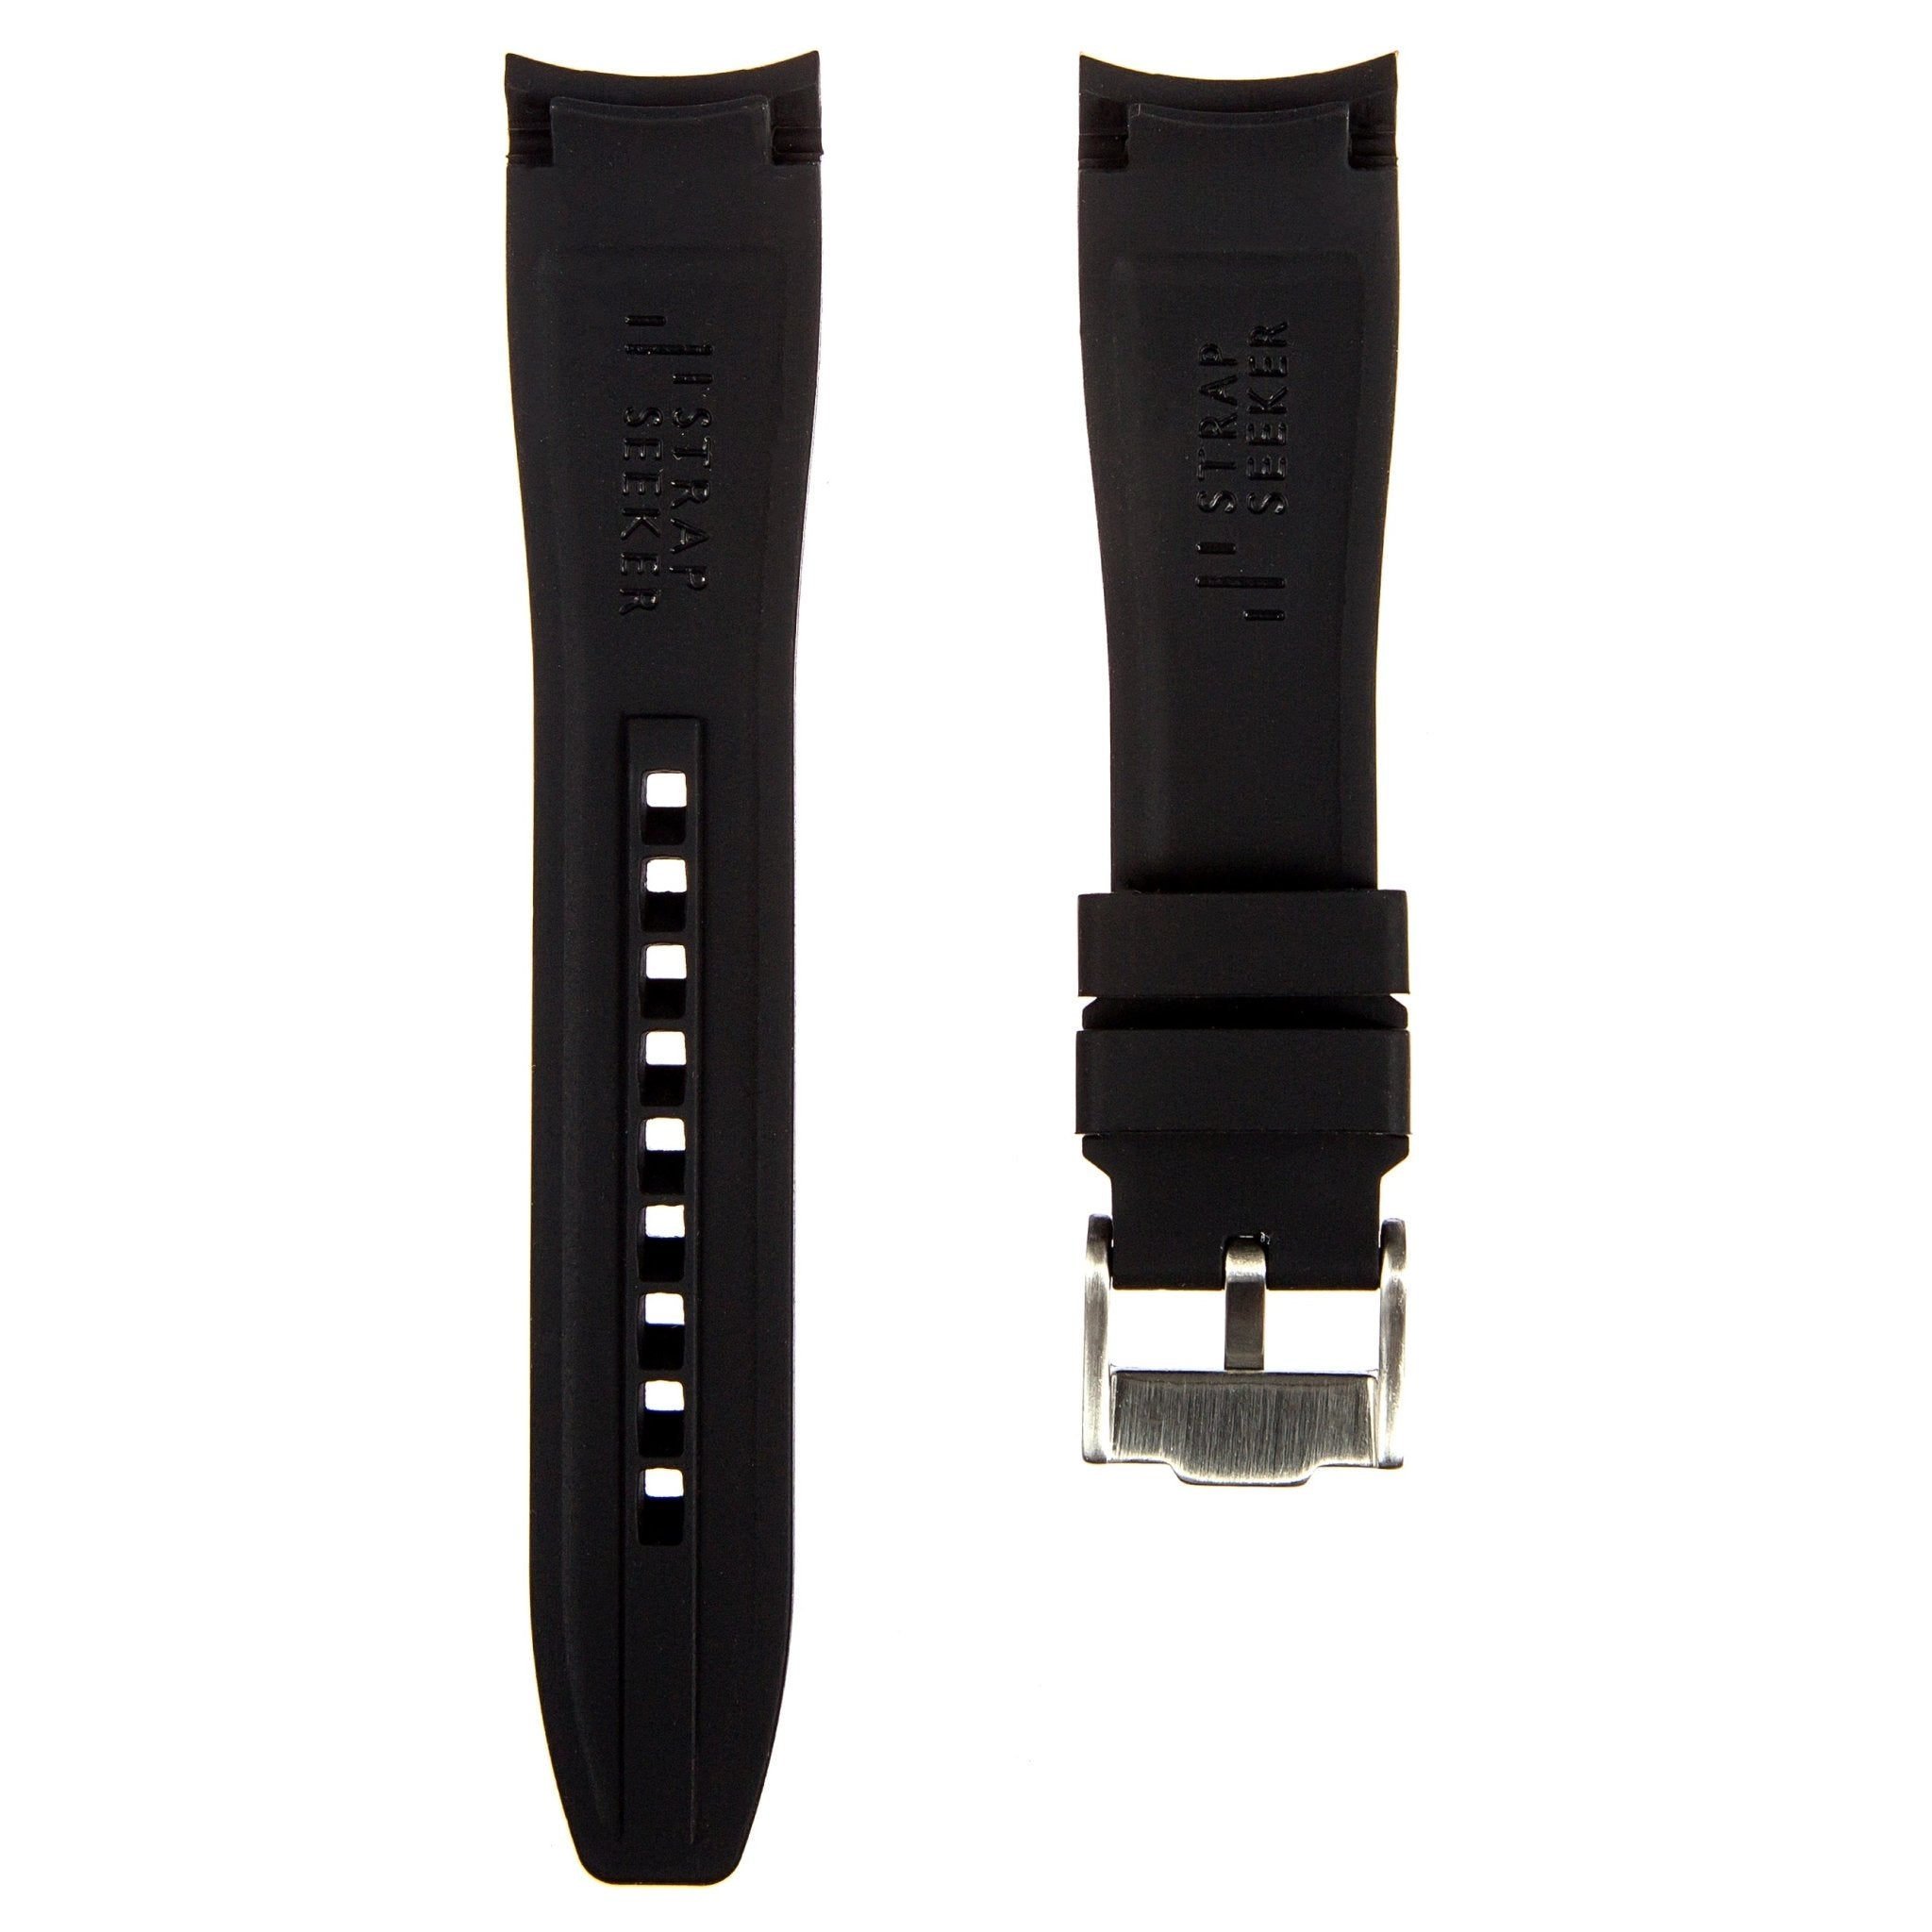 Curved End Soft Silicone Strap - Compatible with Seiko SRPD – Black (2418) -StrapSeeker